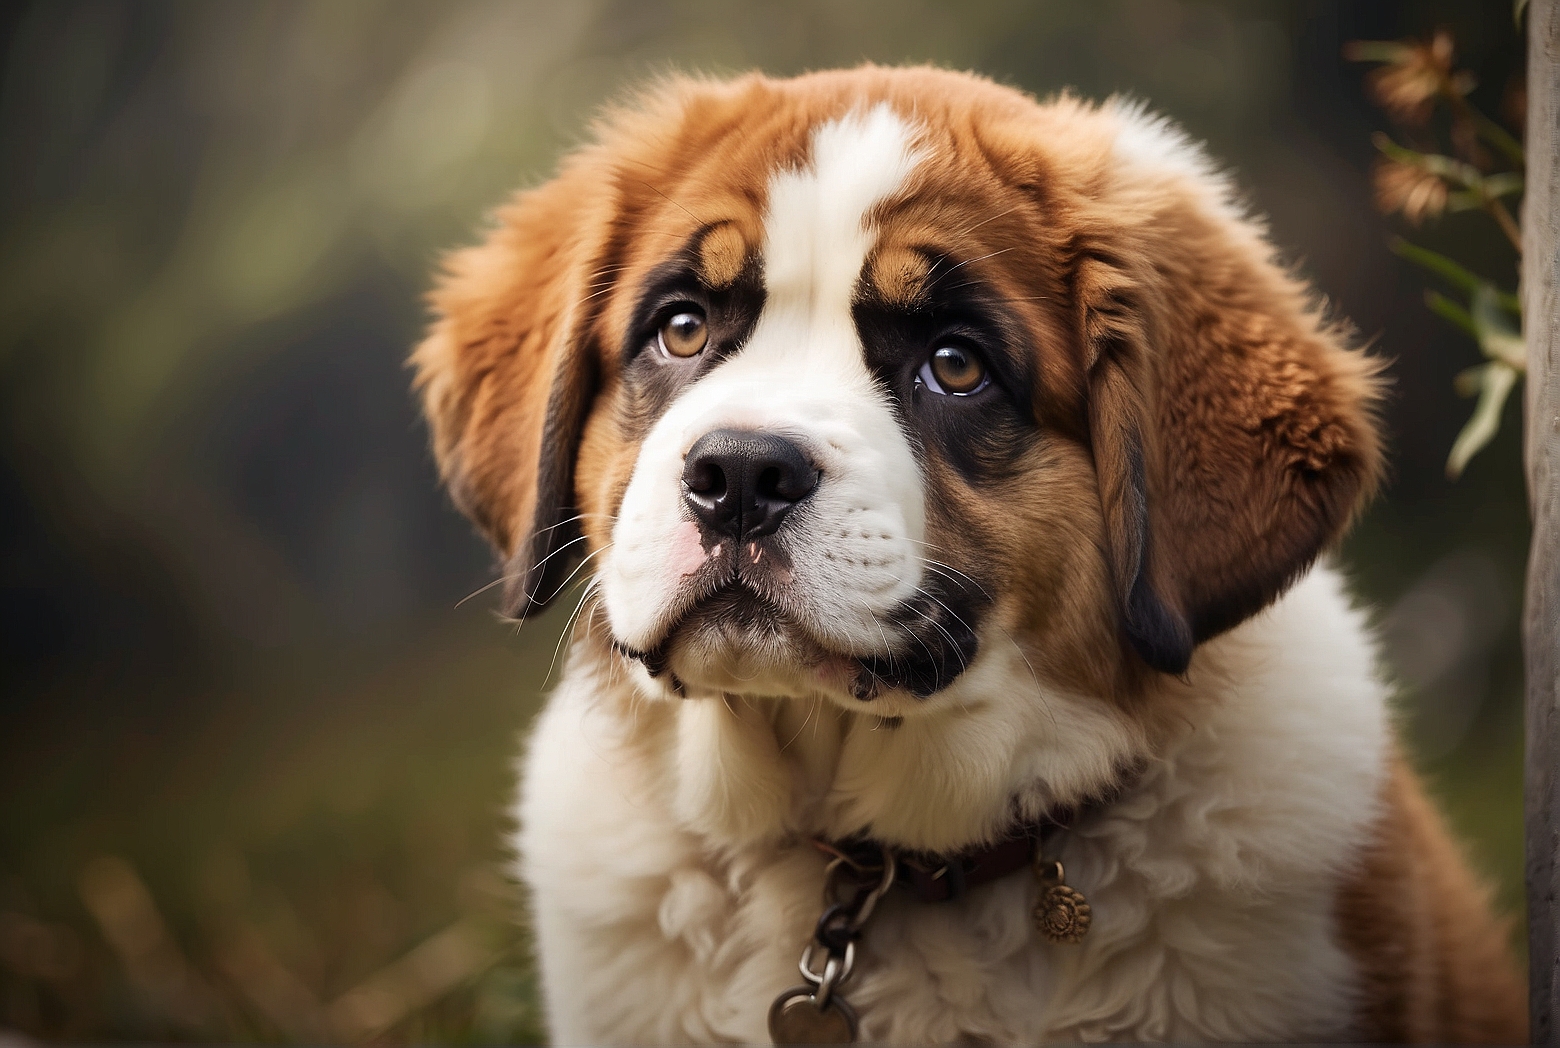 10 Things You Should Know Before Getting a Saint Bernard